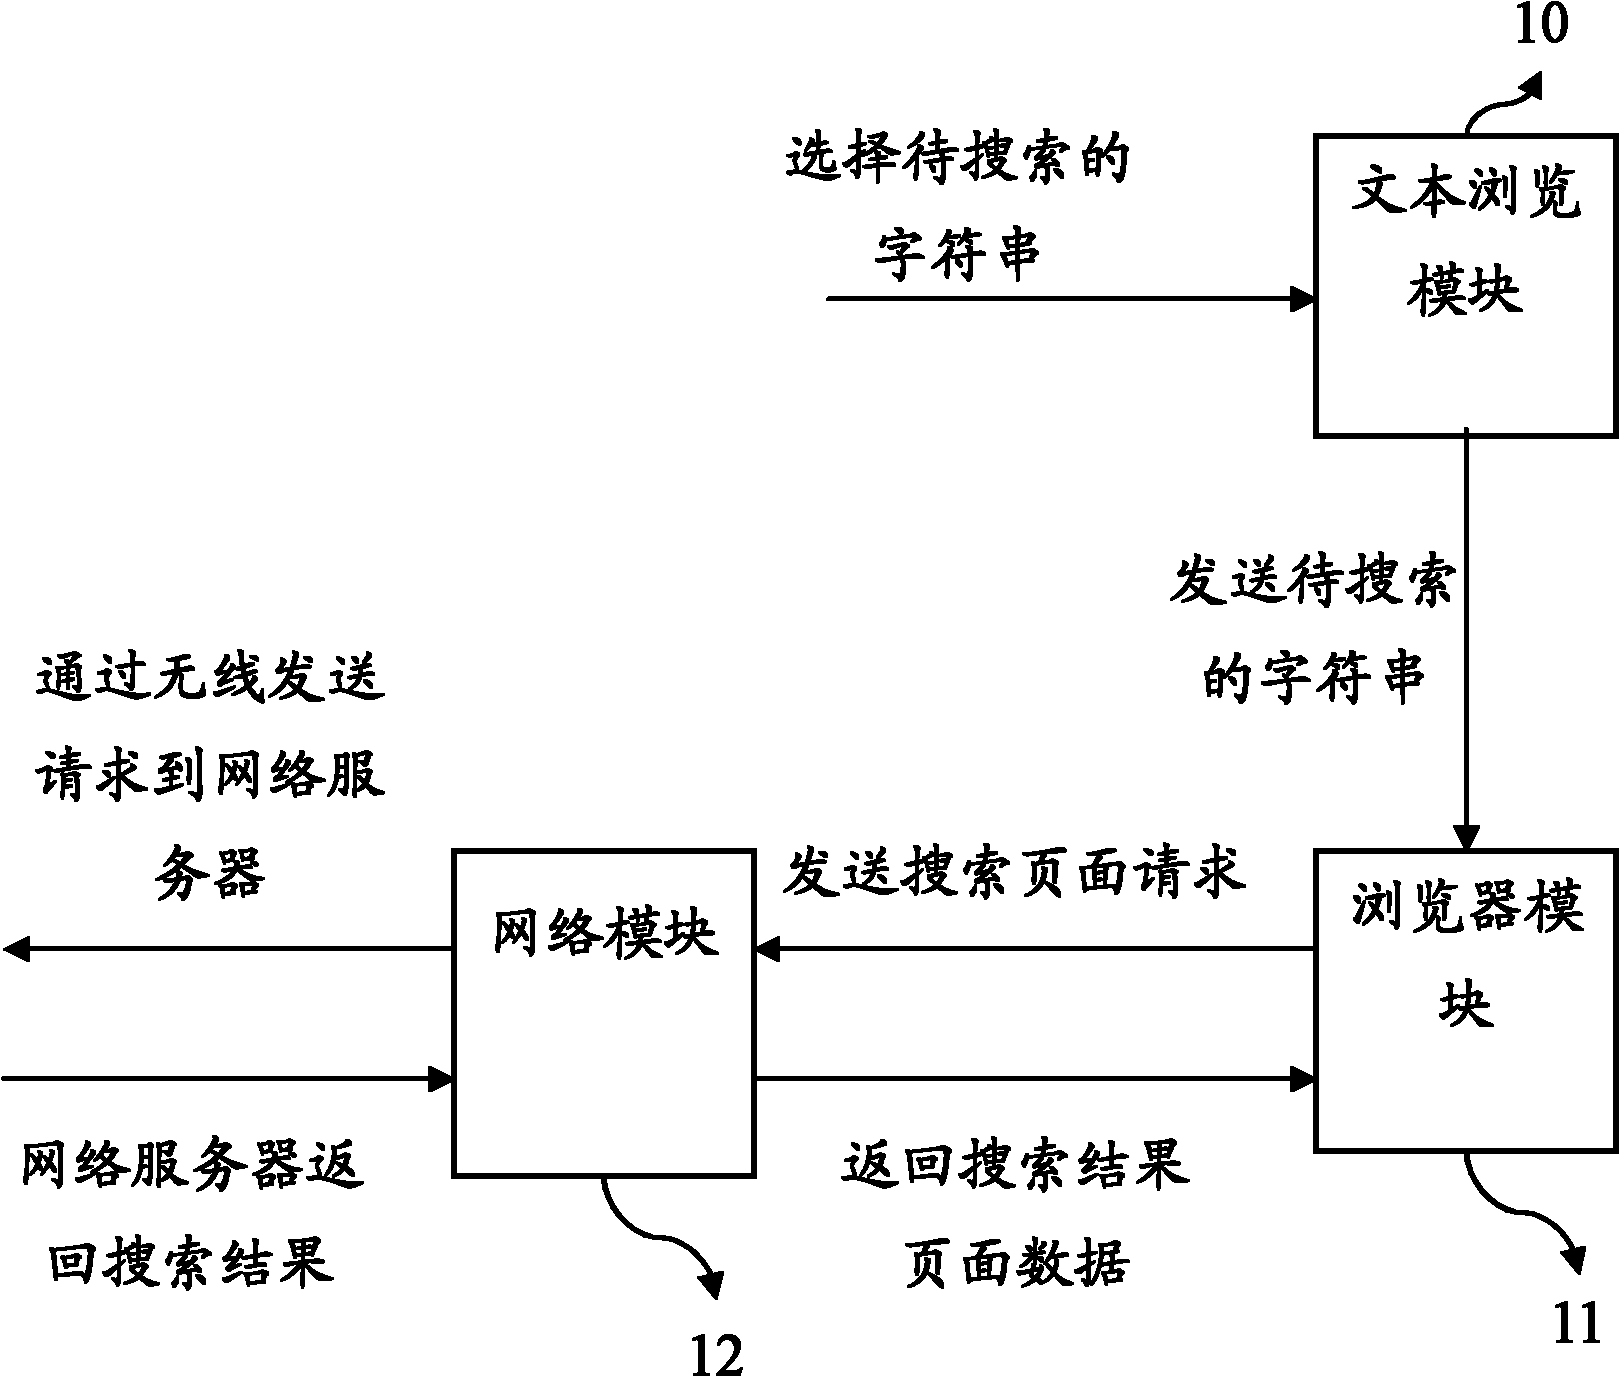 Mobile terminal network searching method and mobile terminal